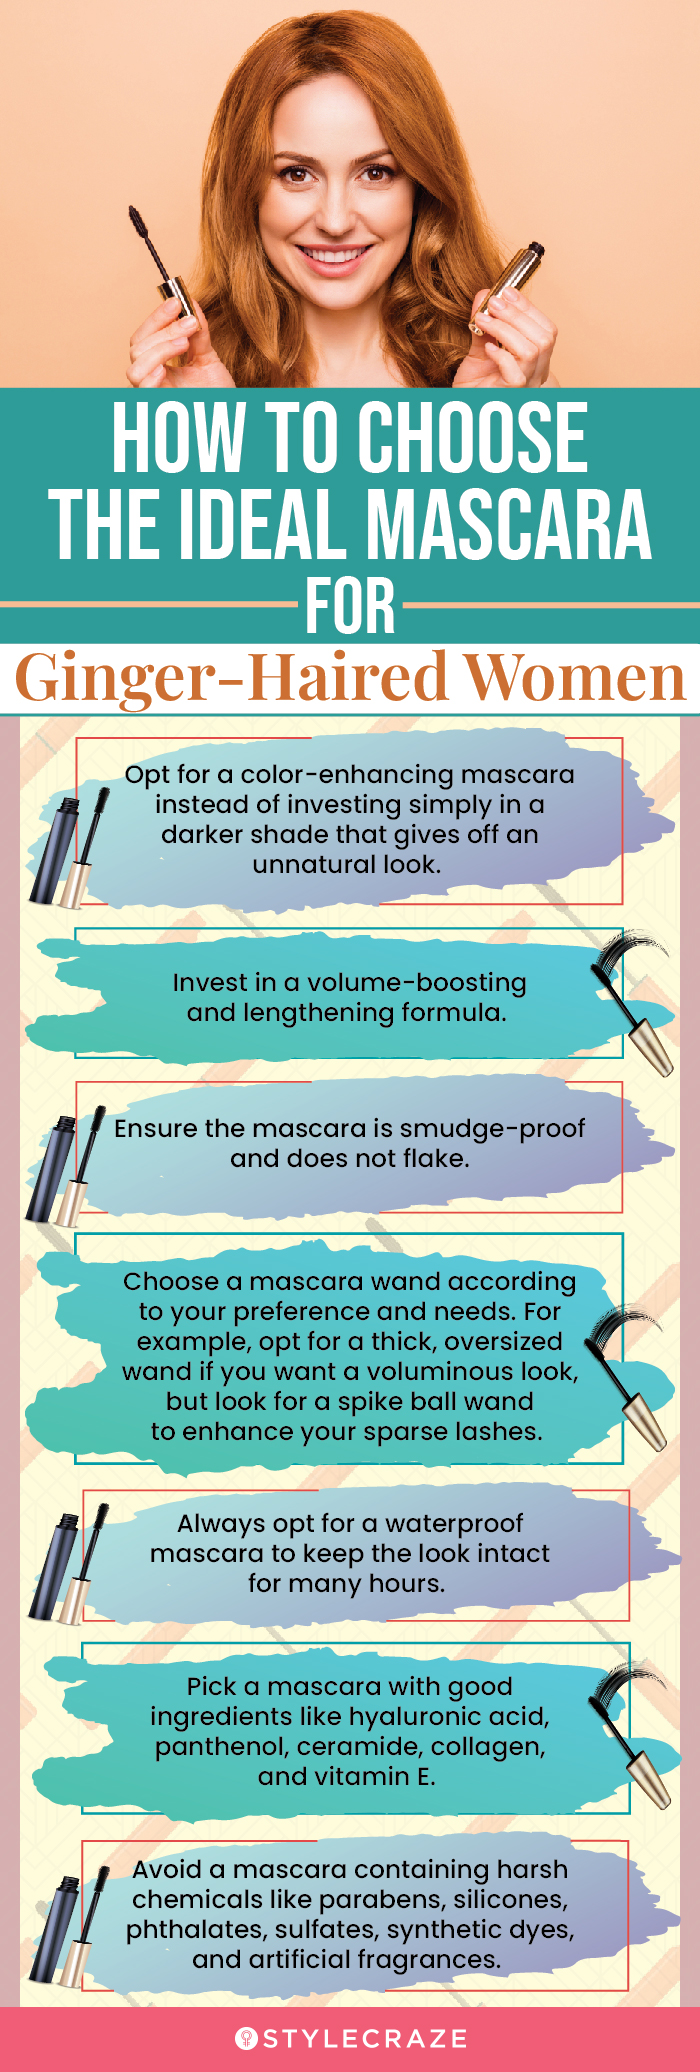 How To Choose The Ideal Mascara For Ginger-Haired Women (infographic)